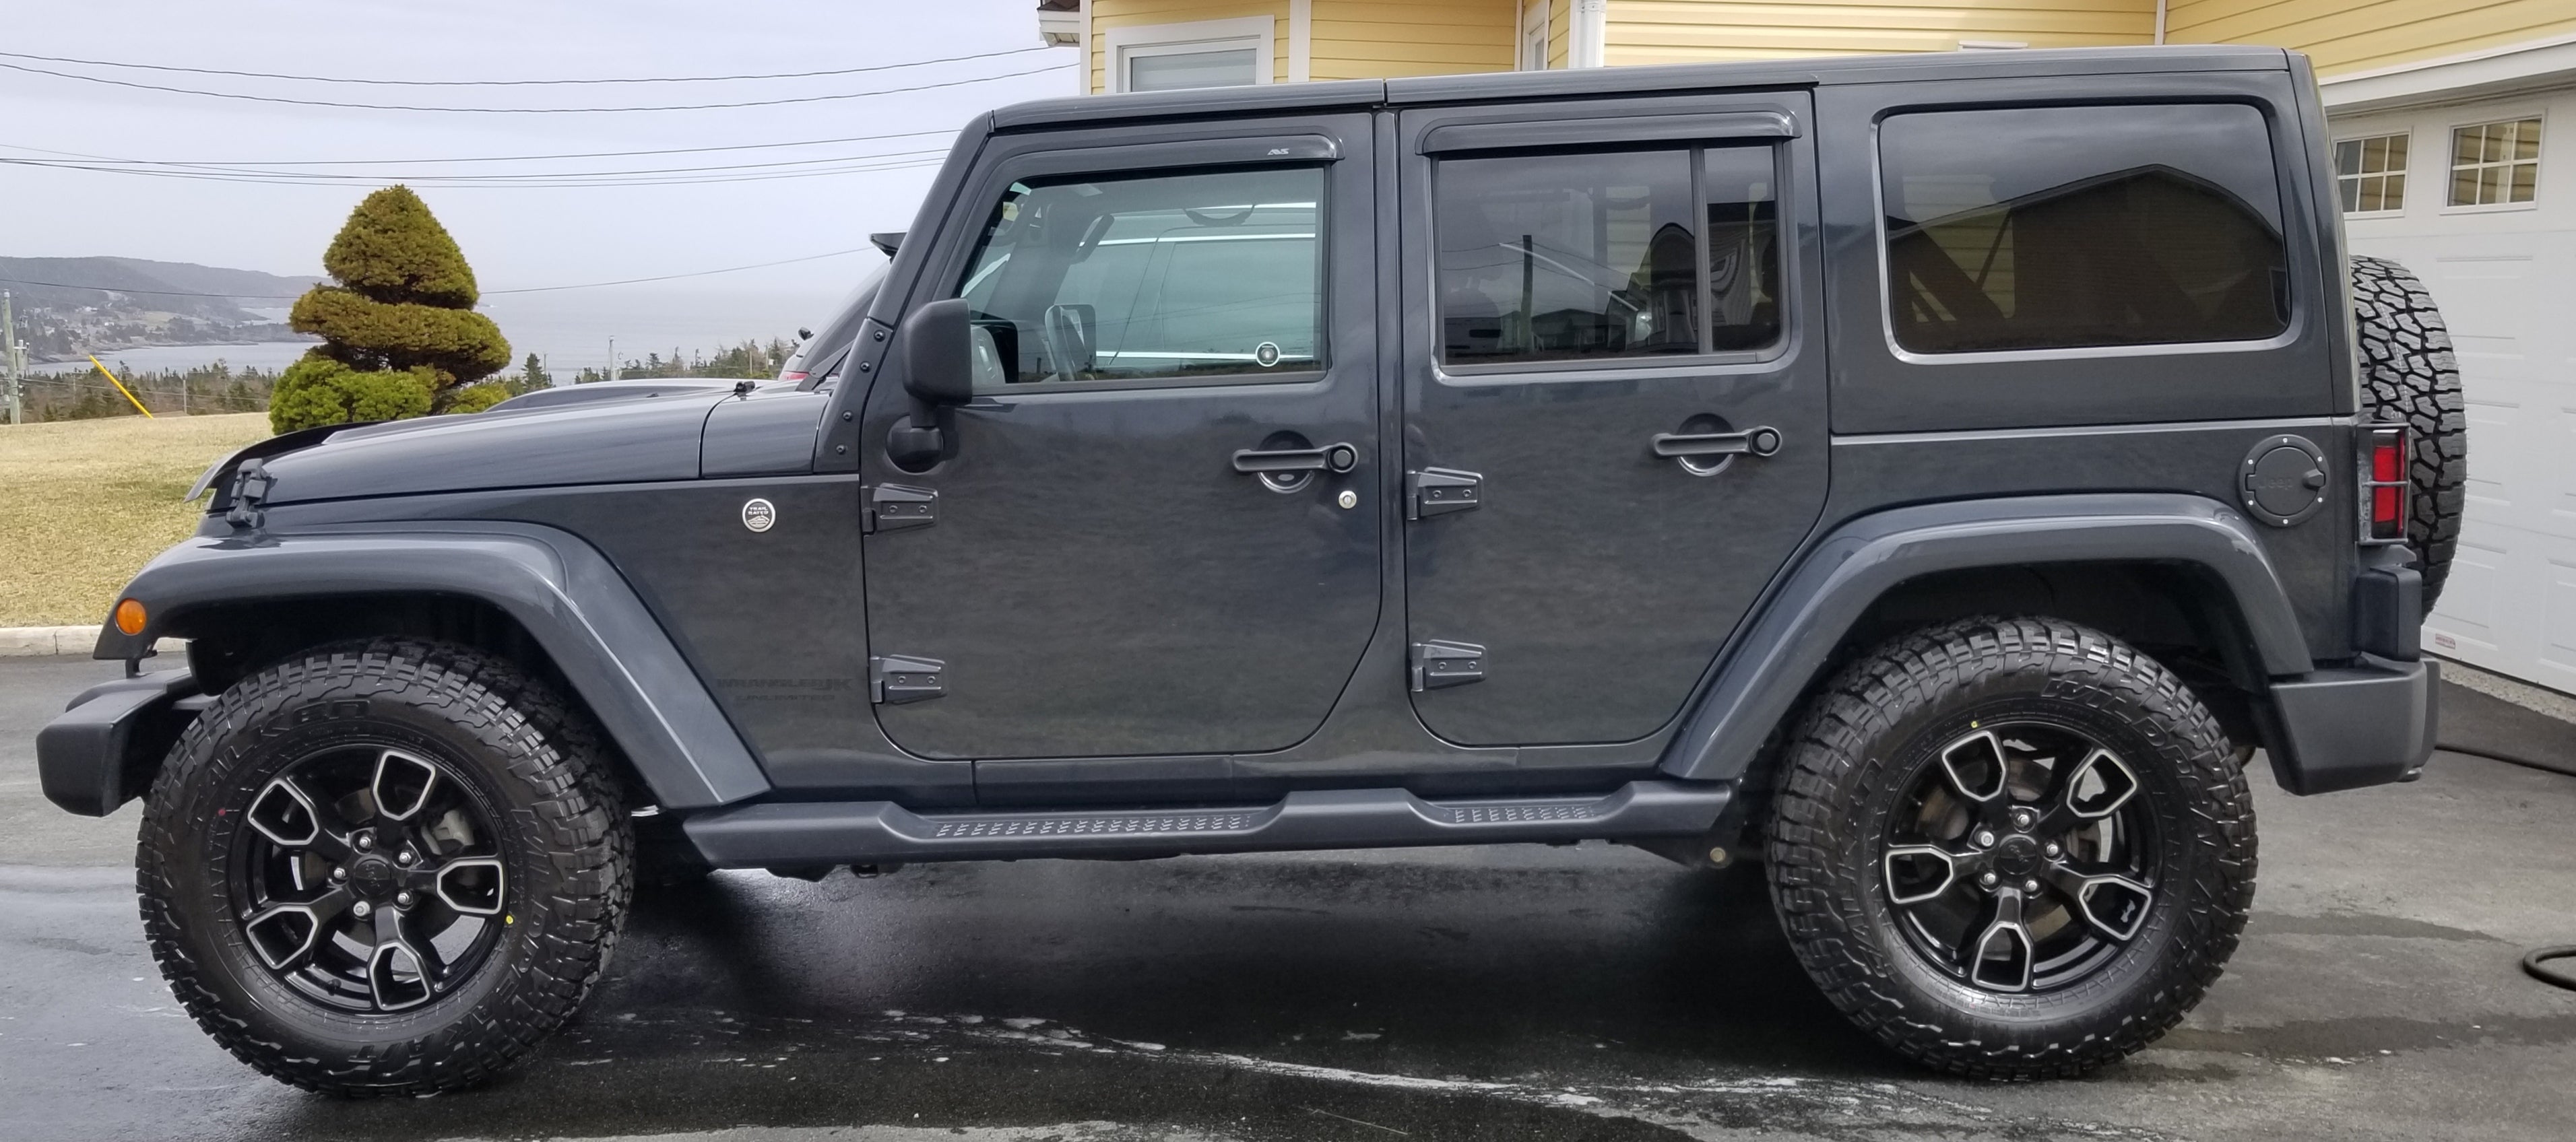 275/70/18 on stock wheel fitment on spare carrier | Jeep Wrangler Forum